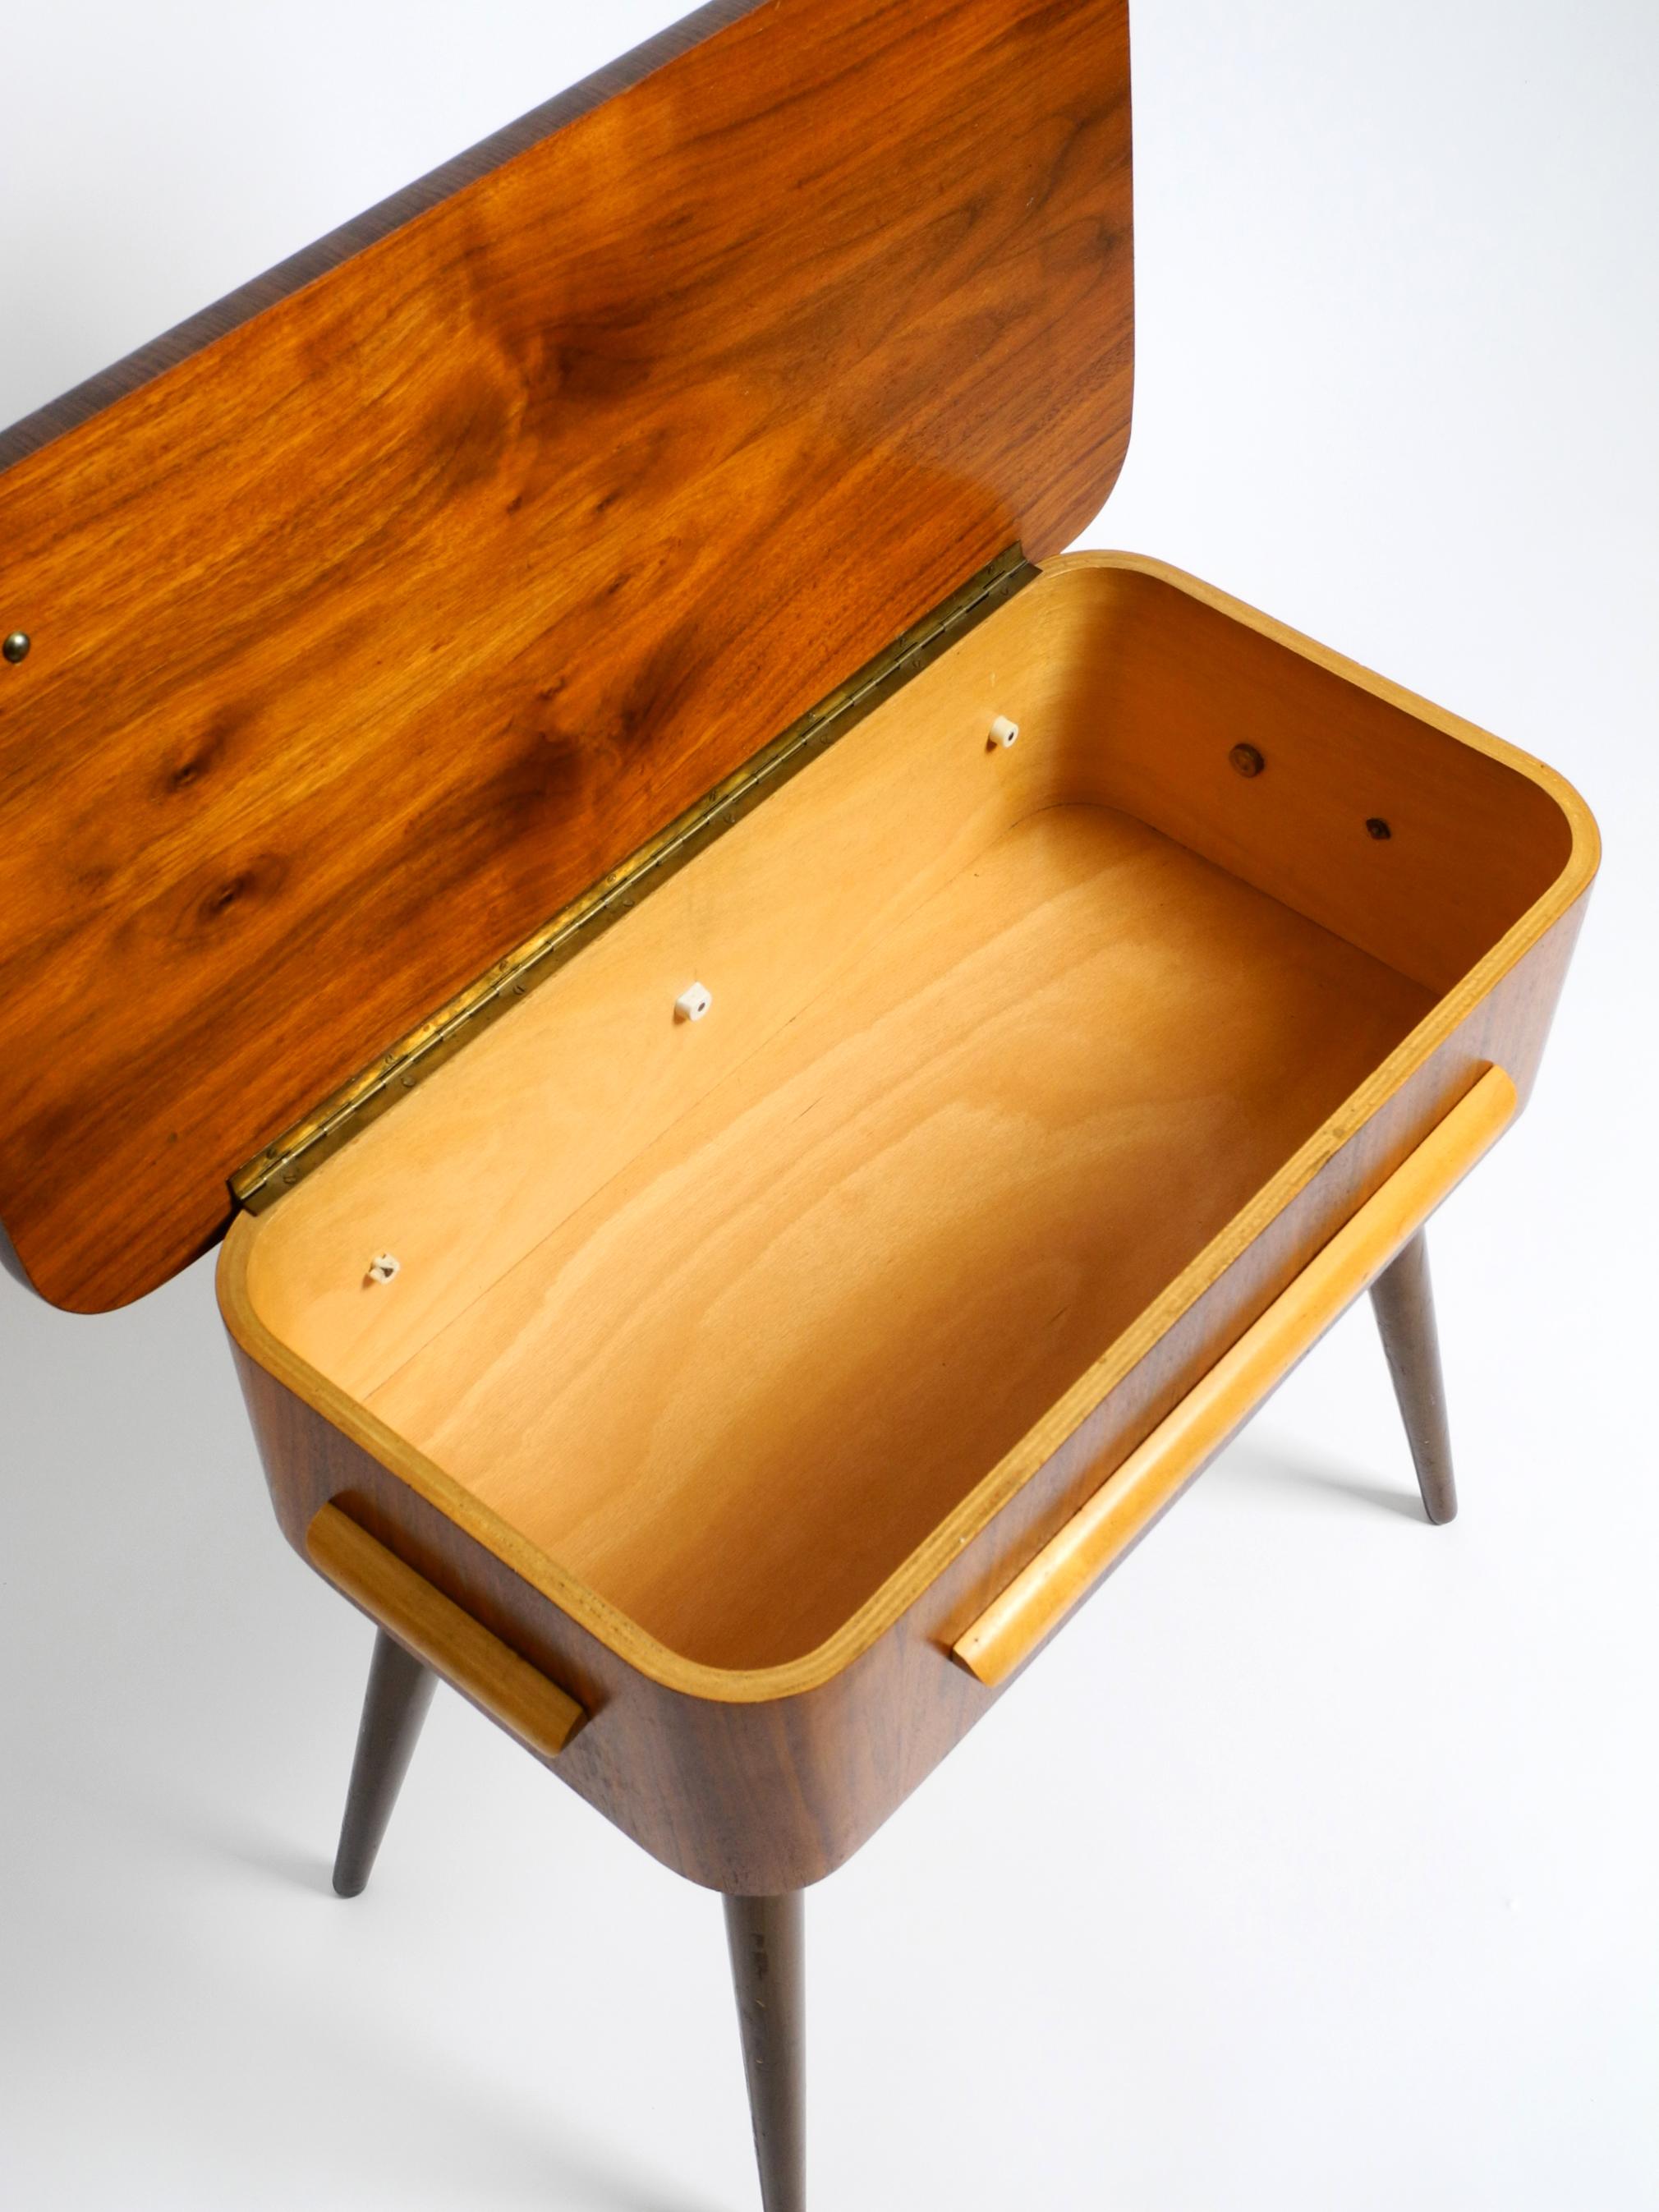 Beautiful Original 1950s Sewing Box with Teak Veneer with Hinged Table Top For Sale 2